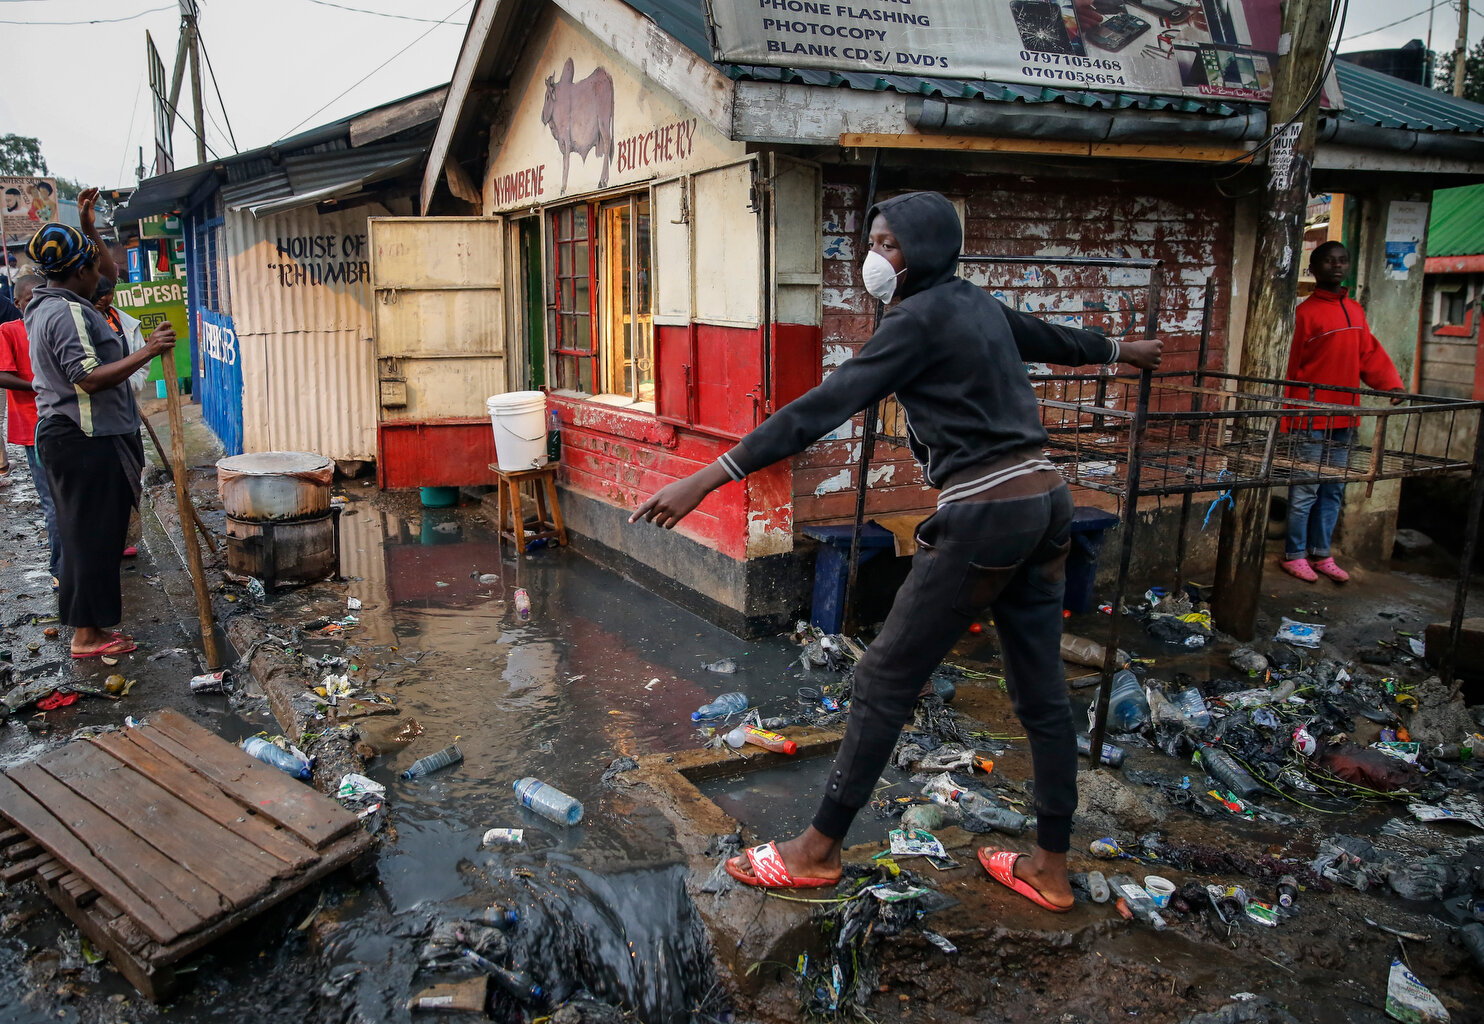  A boy wears a mask as a preventative measure against the spread of the new coronavirus, as he navigates a flood of water mixed with garbage following heavy rains, in the Kibera slum, or informal settlement, of Nairobi, Kenya, Thursday, March 26, 202